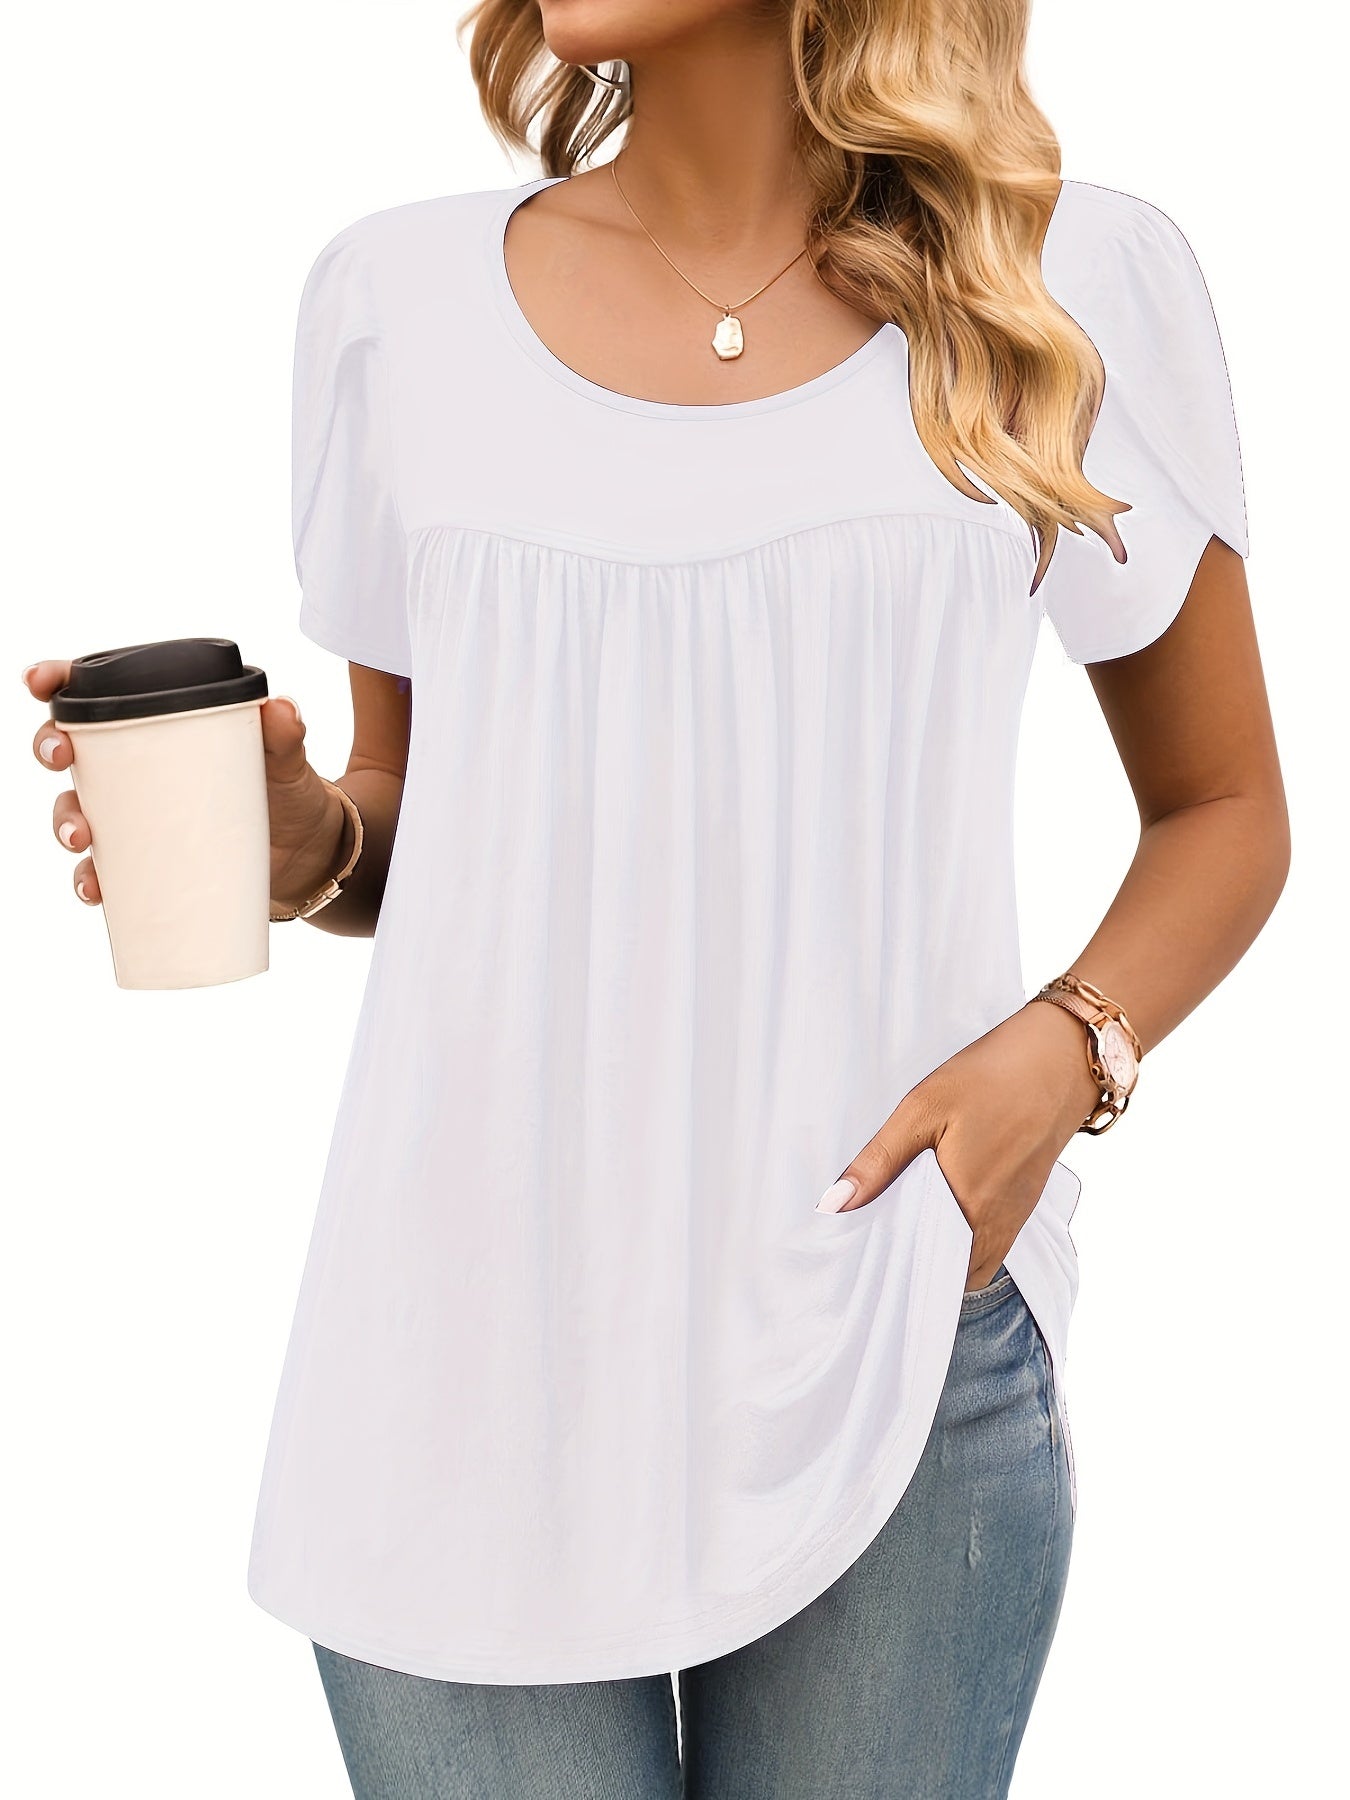 Vzyzv Solid Pleated Crew Neck T-Shirt, Casual Petal Sleeve Top For Spring & Summer, Women's Clothing